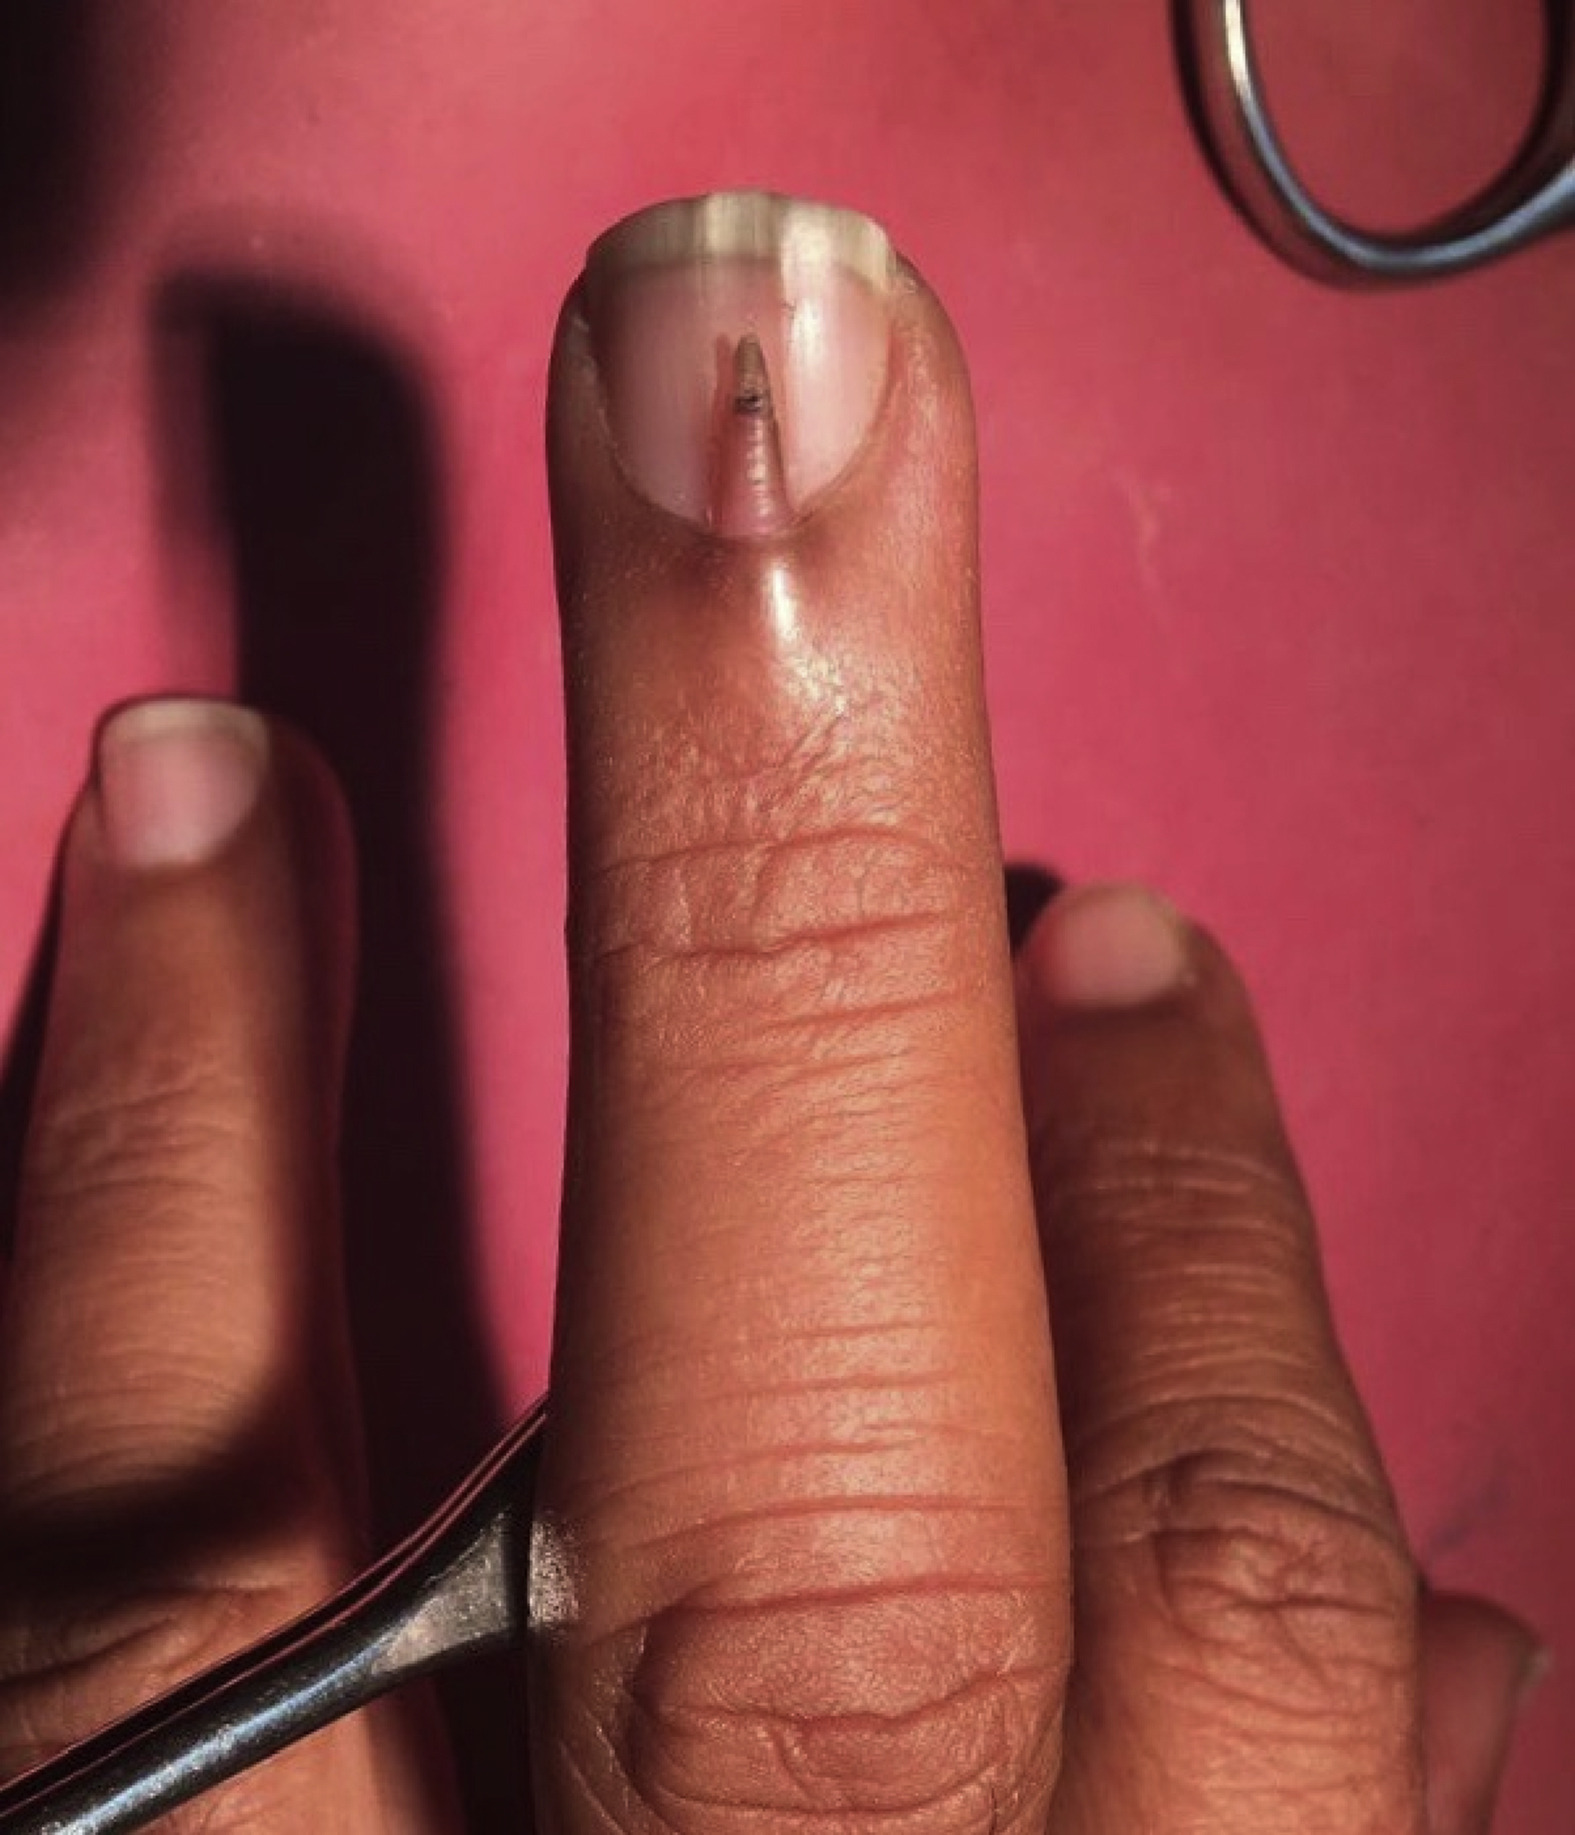 Here Is A Teeny Nail Growing On Top Of Another Nail On Someone’s Middle Finger